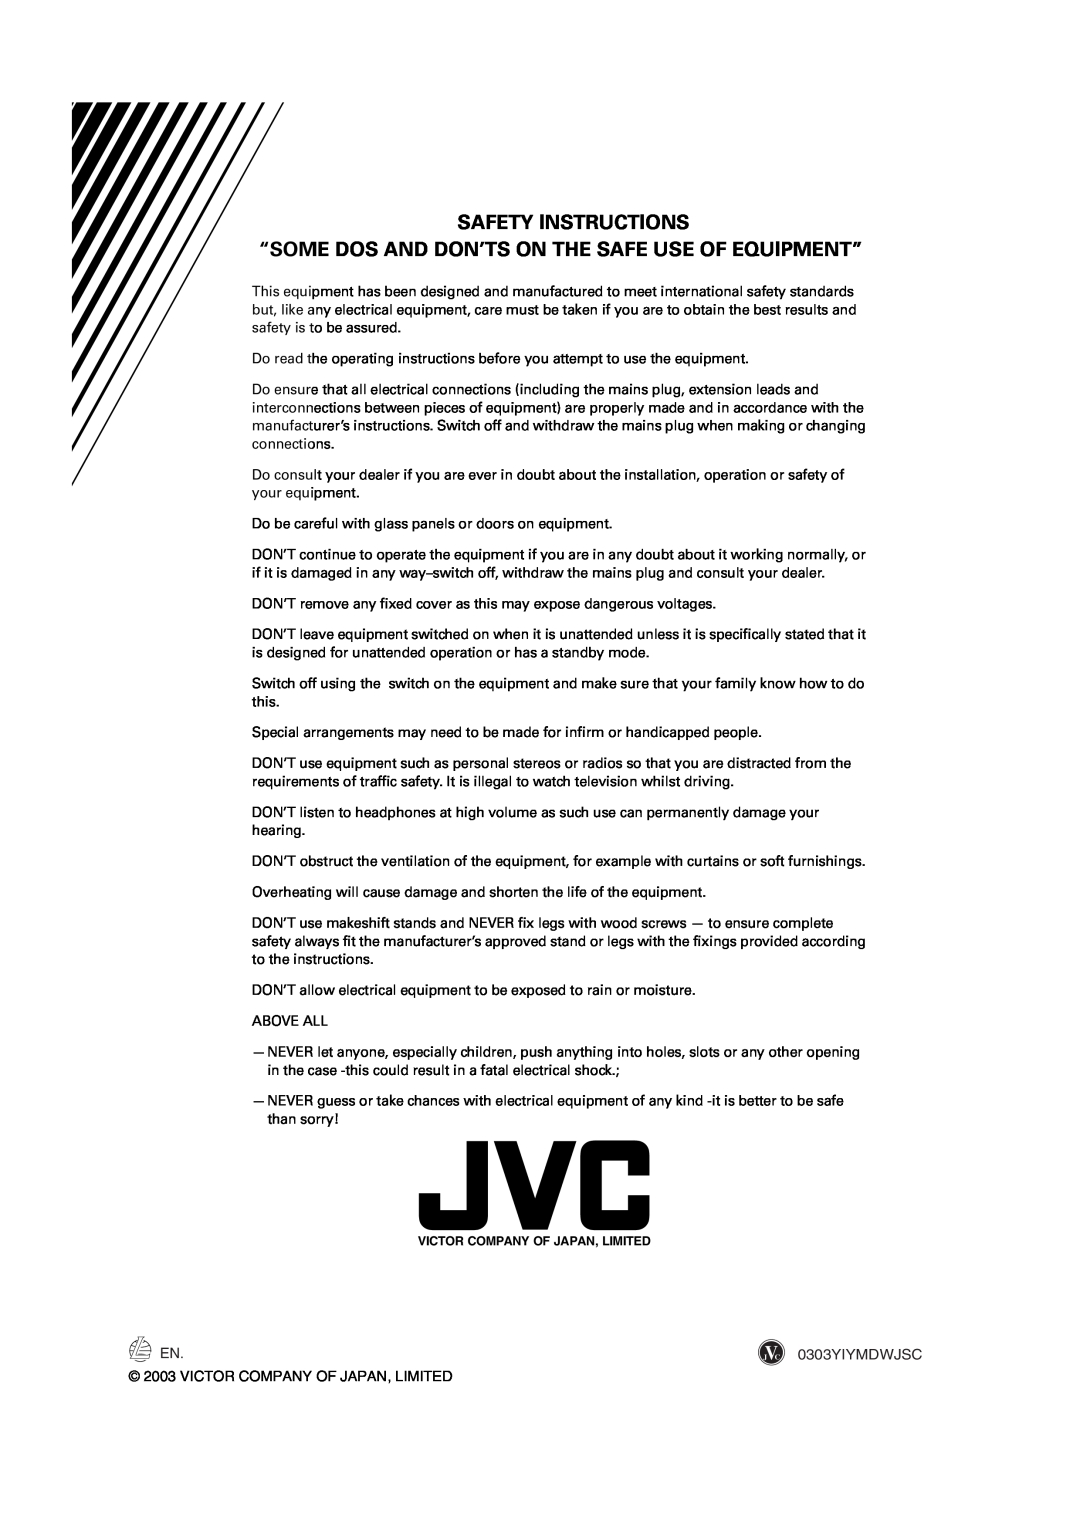 JVC LET0227-003A manual Safety Instructions, “Some Dos And Don’Ts On The Safe Use Of Equipment” 